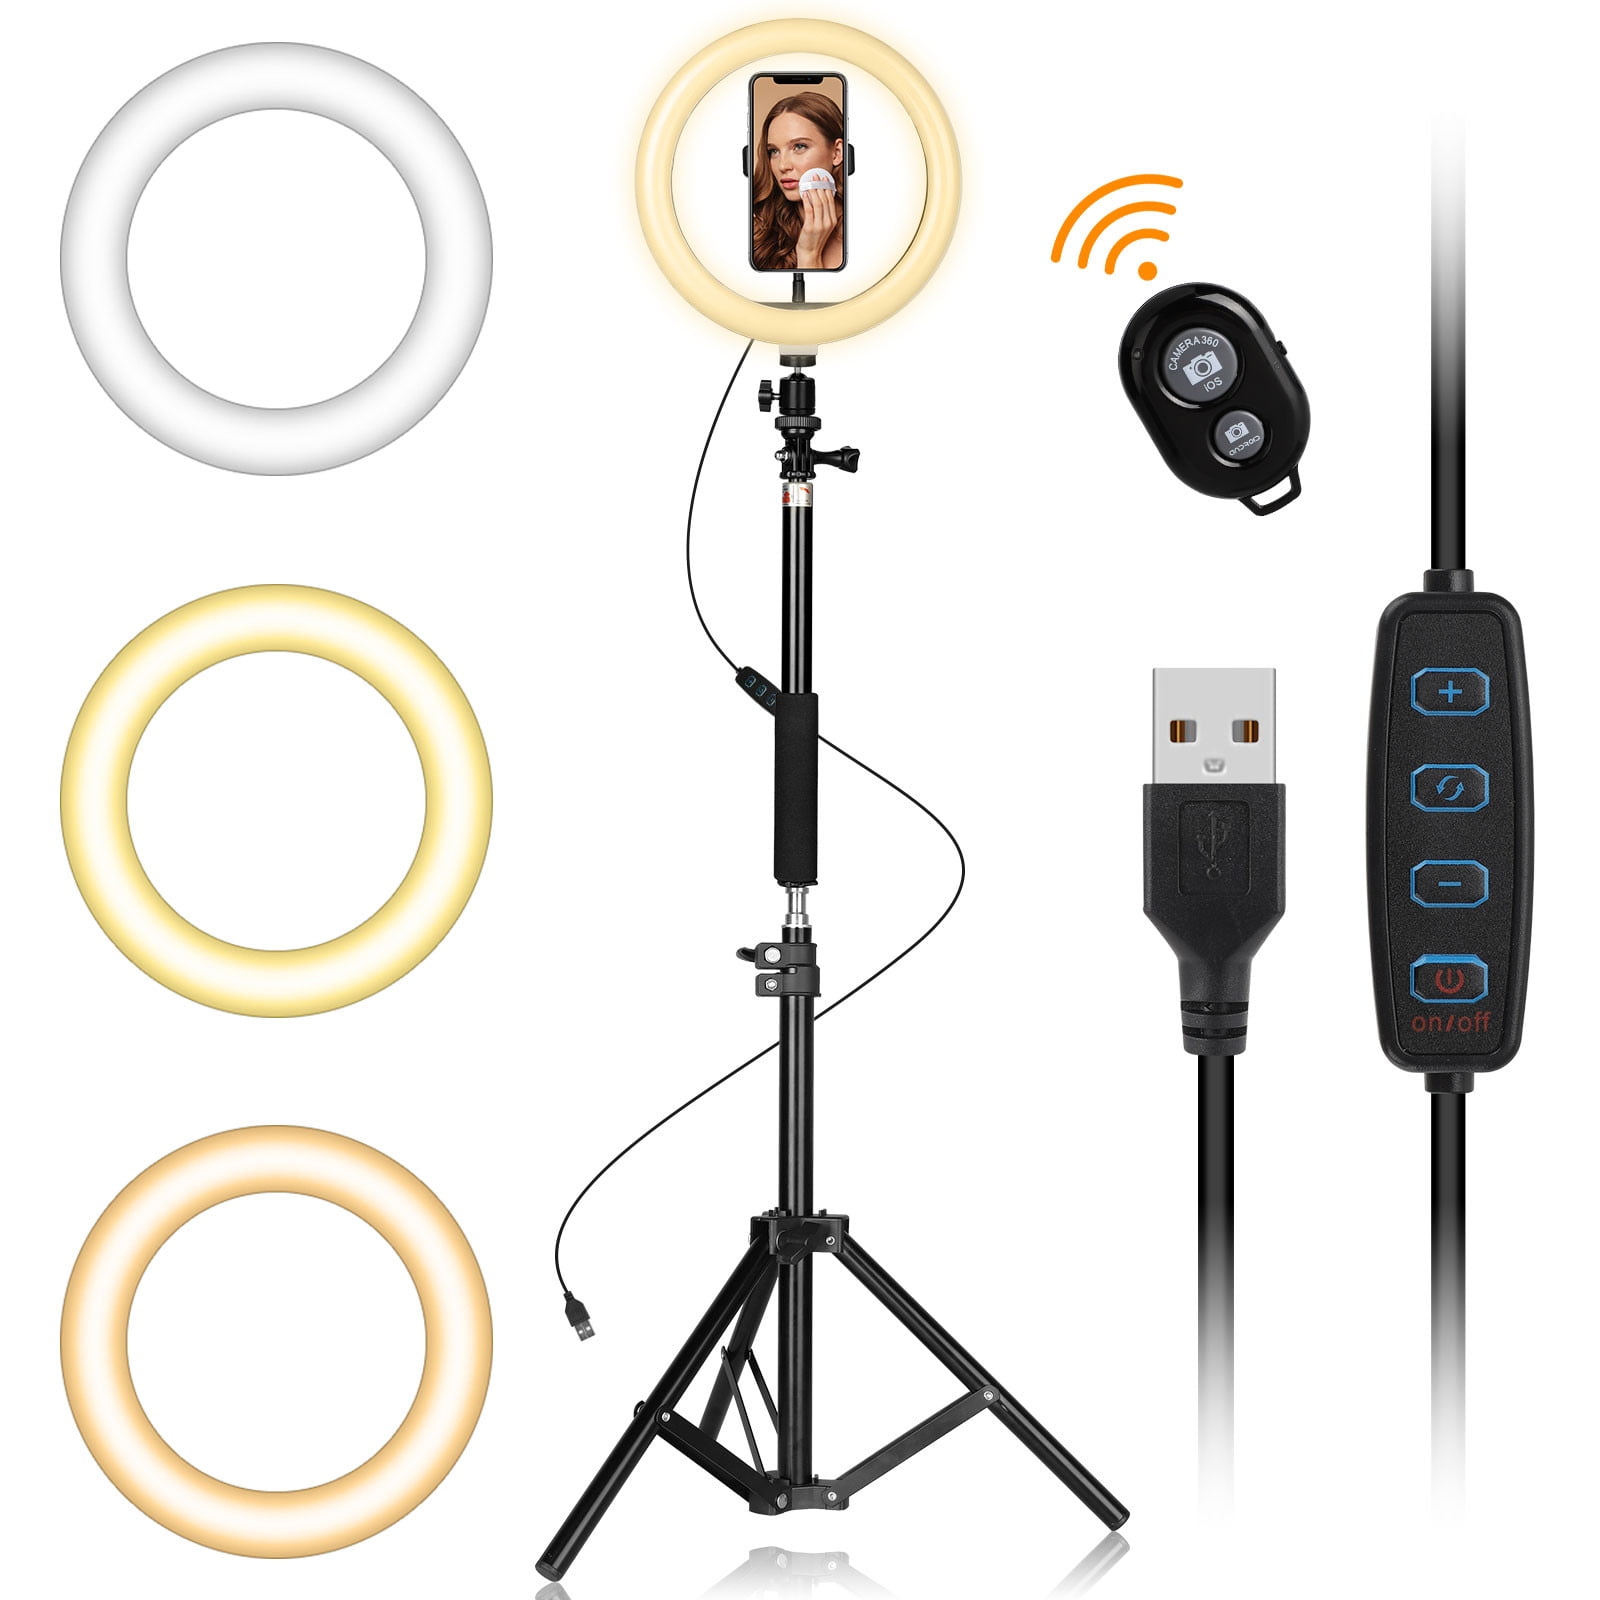 LED Ring Light 6 10 Brightness Levels,3 Light Modes with Adjustable Tripod Stand and Cell Phone Holde for Live Streaming & YouTube Video Dimmable Desk Makeup Ring Light for Photography